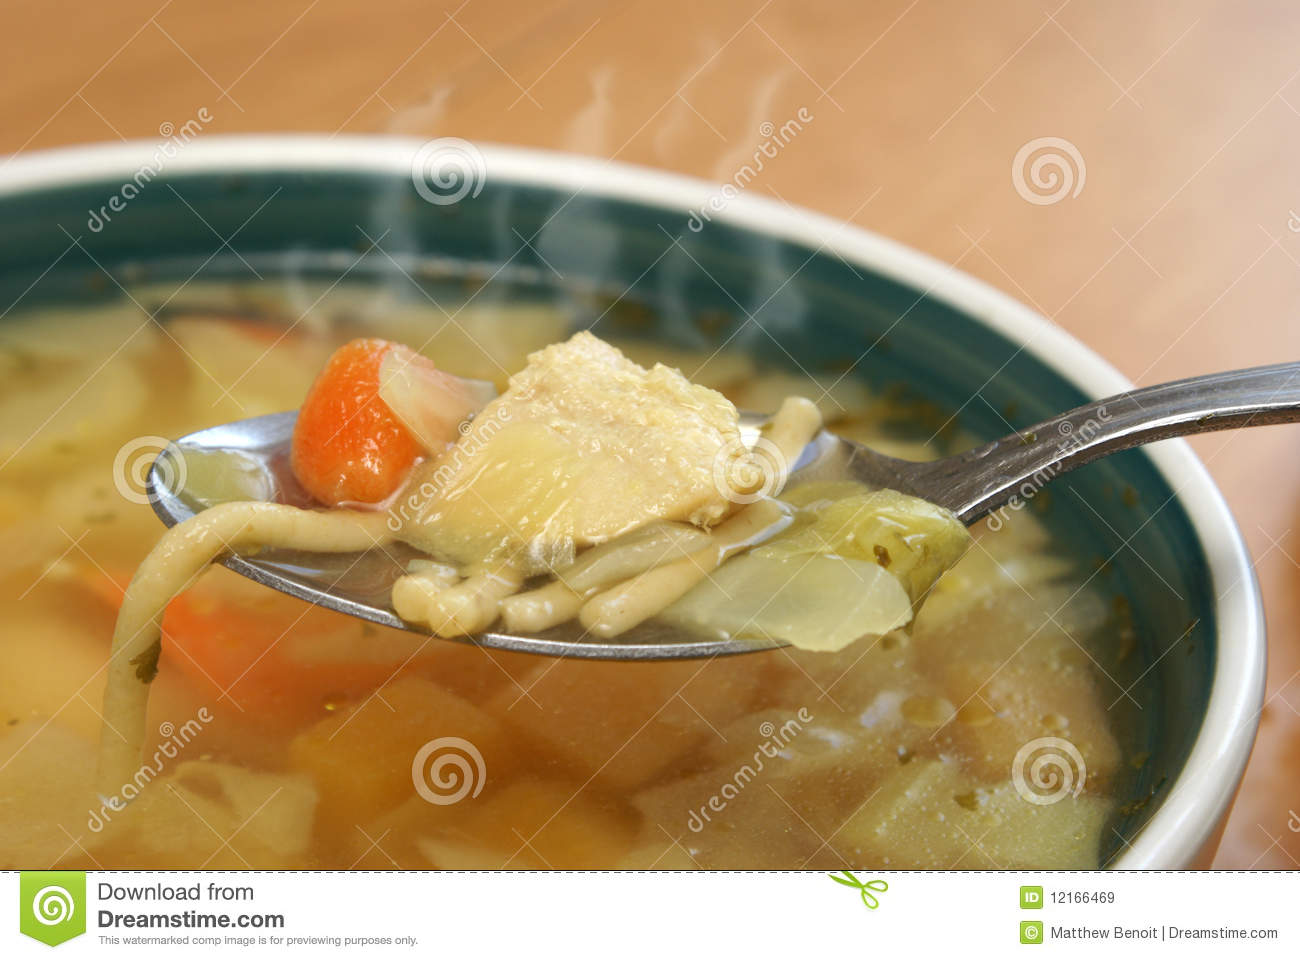 Hearty Chicken Noodle Soup Royalty Free Stock Images   Image  12166469